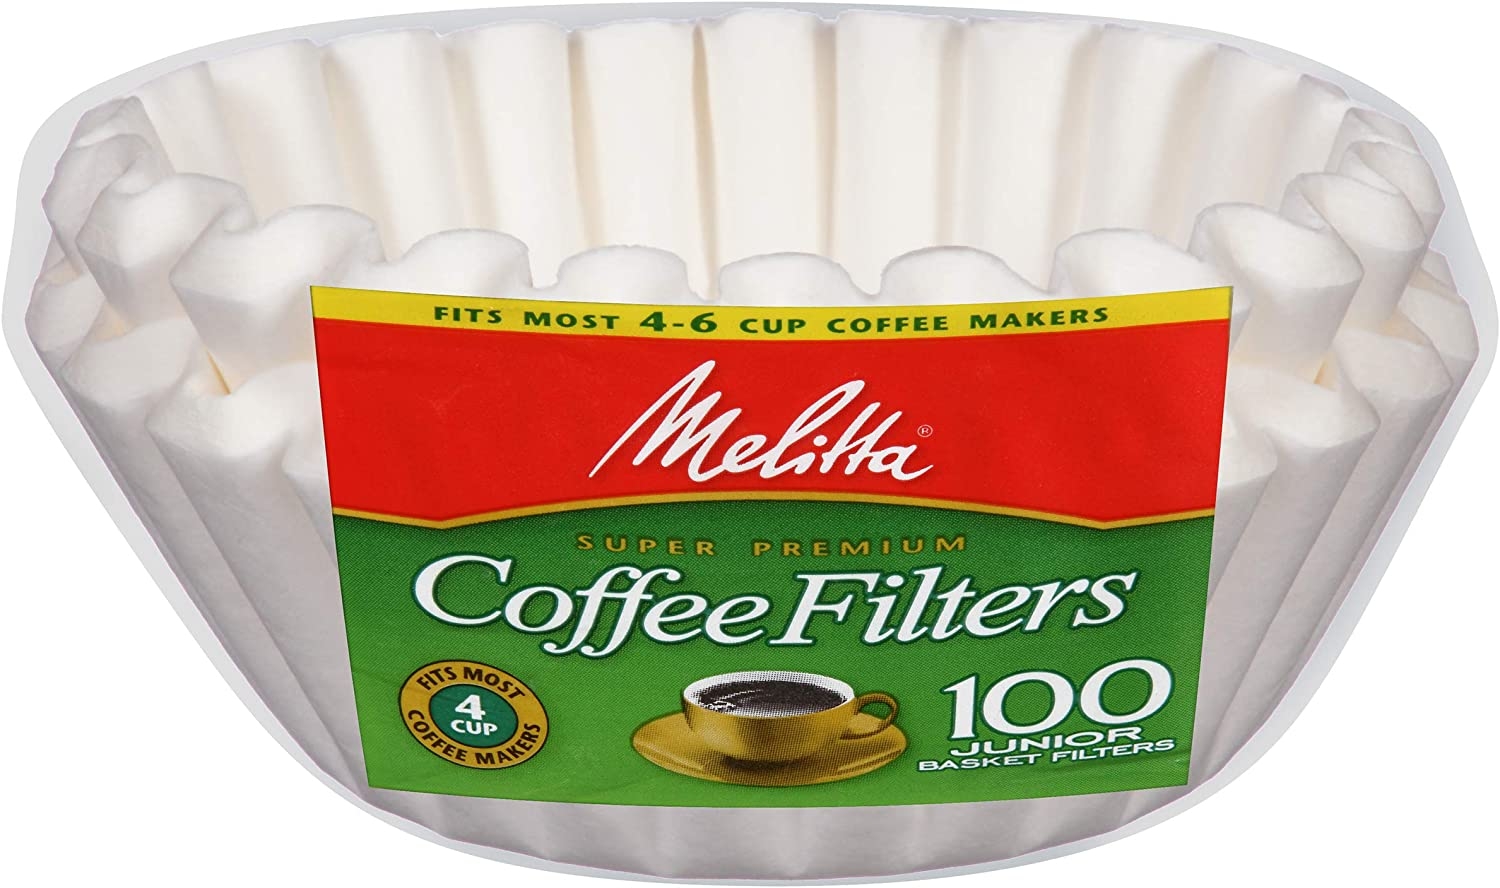 Melitta Junior Basket Coffee Filters White 100 Count Import To Shop ×Product customization General Description Gallery Reviews